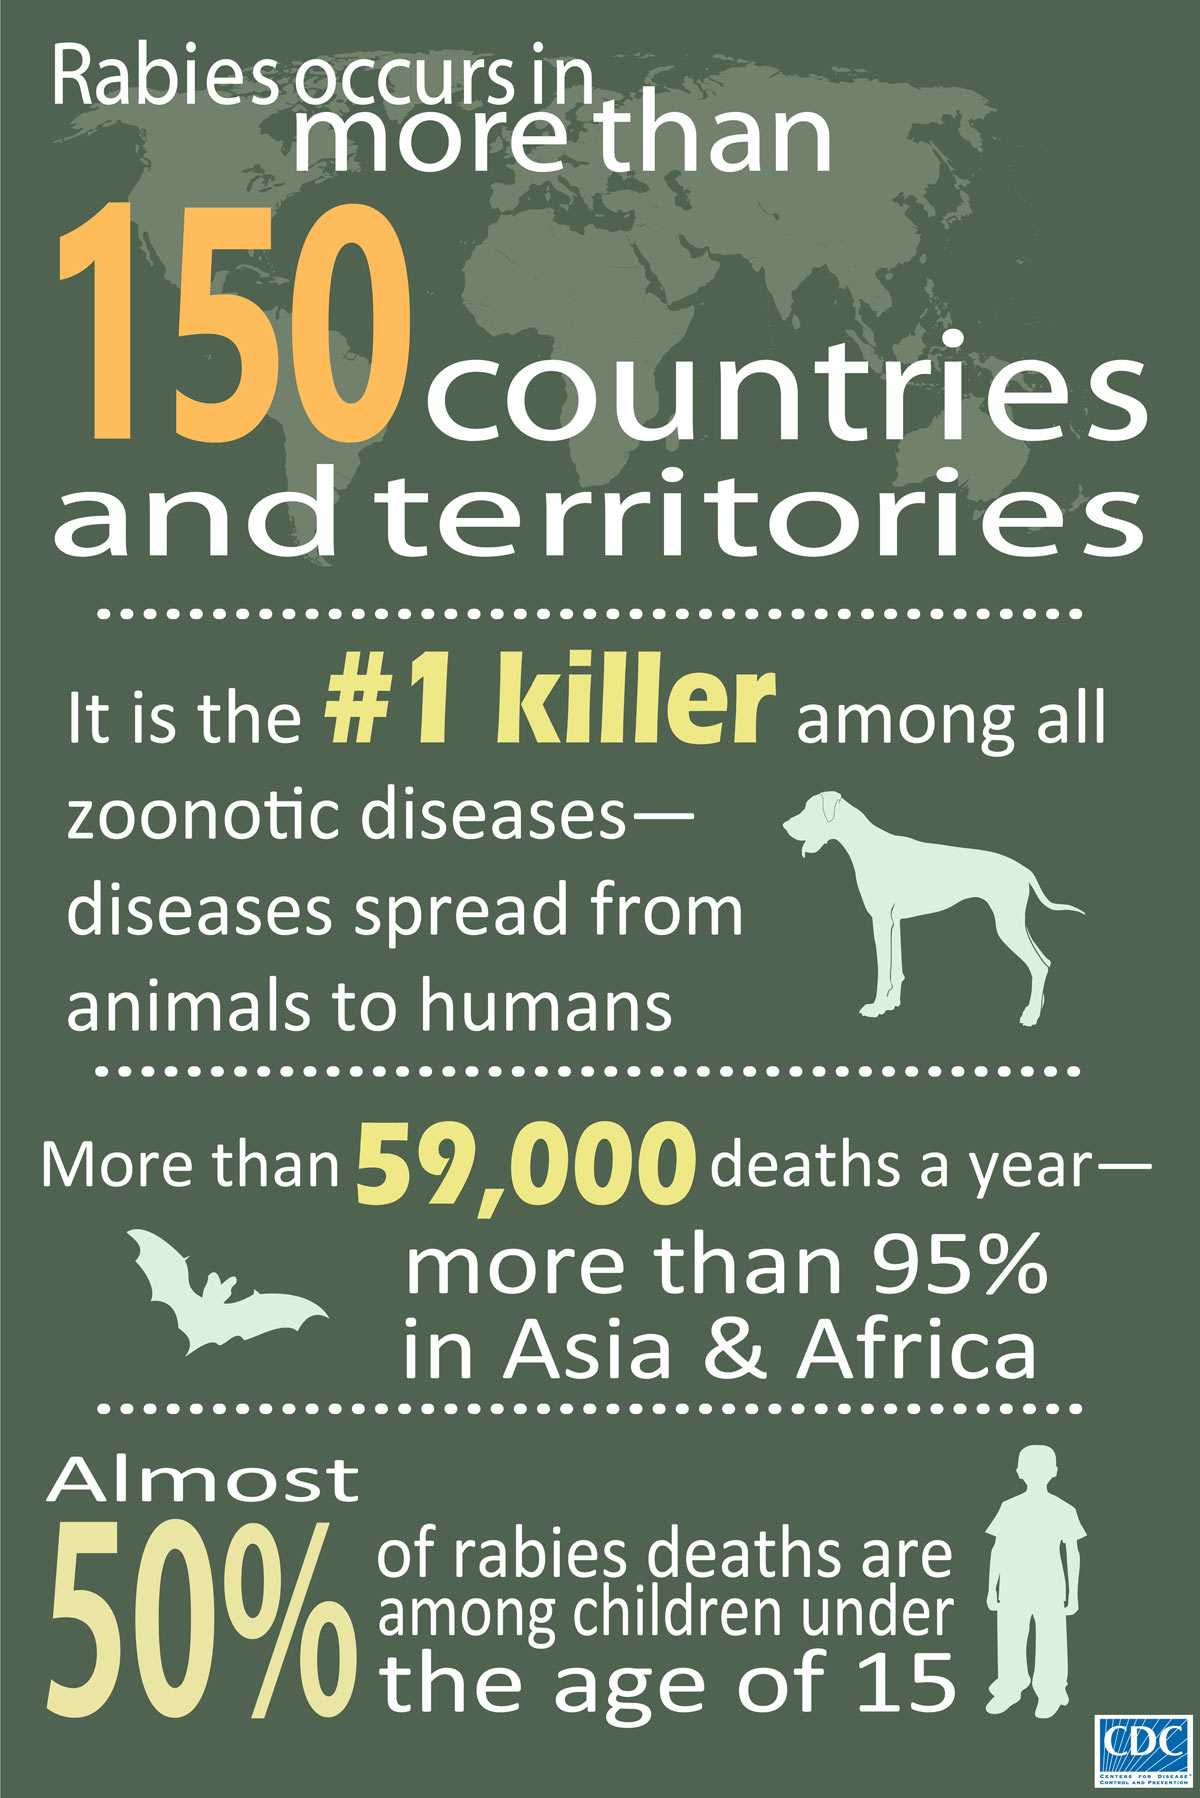 Infographic of the Week: Rabies occur in more than 150 countries and territories. More than 55, 000 deaths a year- more than 95% in Asia & Africa. Almost 50% of rabies deaths are among children under the age of 15.